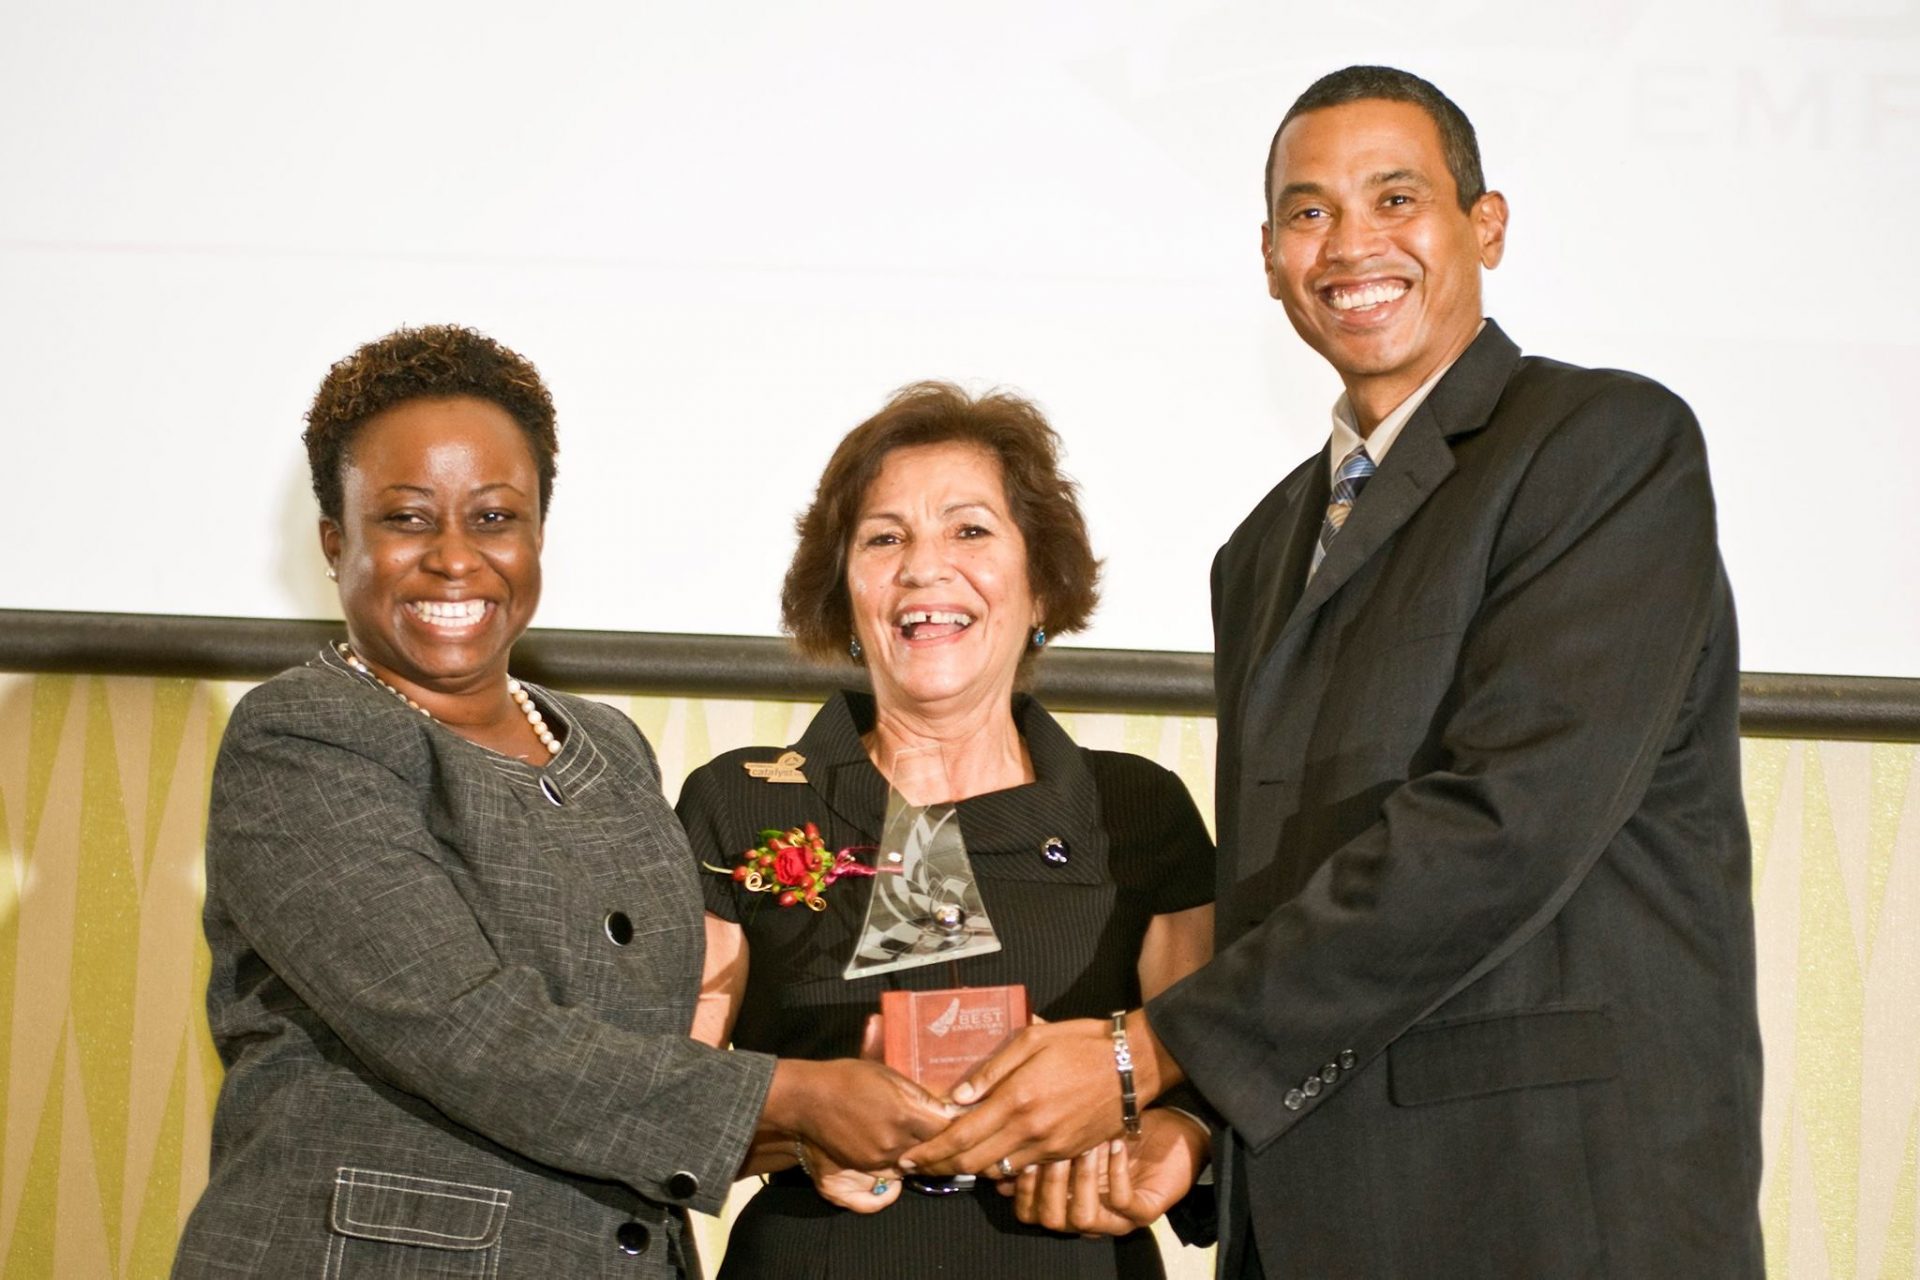 Ros Jackson, Managing Director of Caribbean Catalyst Inc., presenting to Winner of the Large Business Category 2012 - The Bank of Nova Scotia Caribbean East